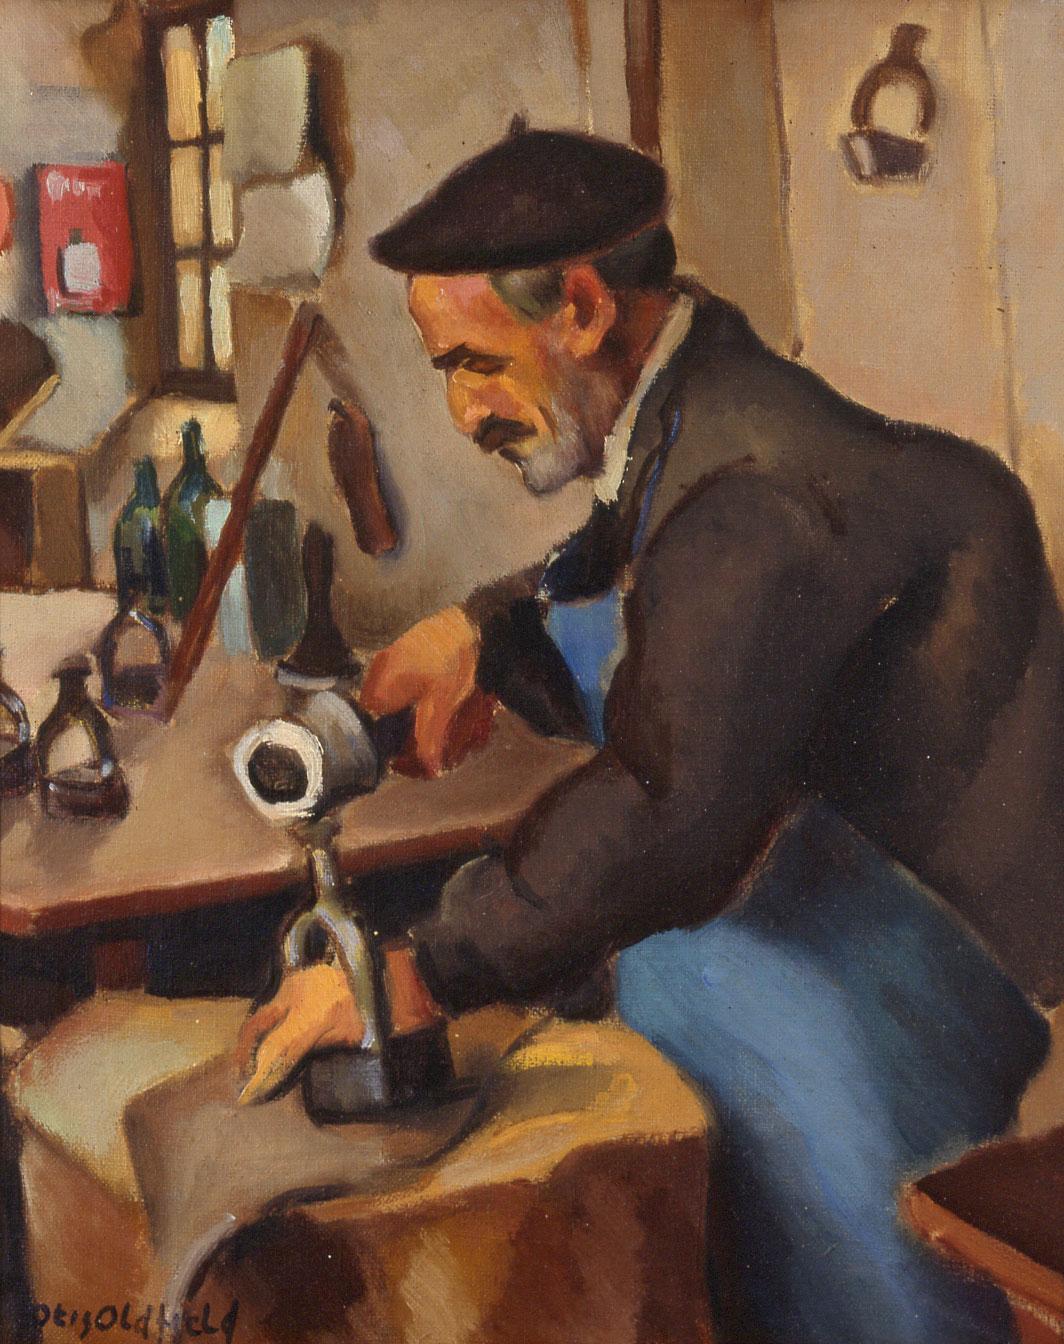 "Old Shoemaker" Ashcan 20th Century Modernism 1924 California WPA Realism Worker